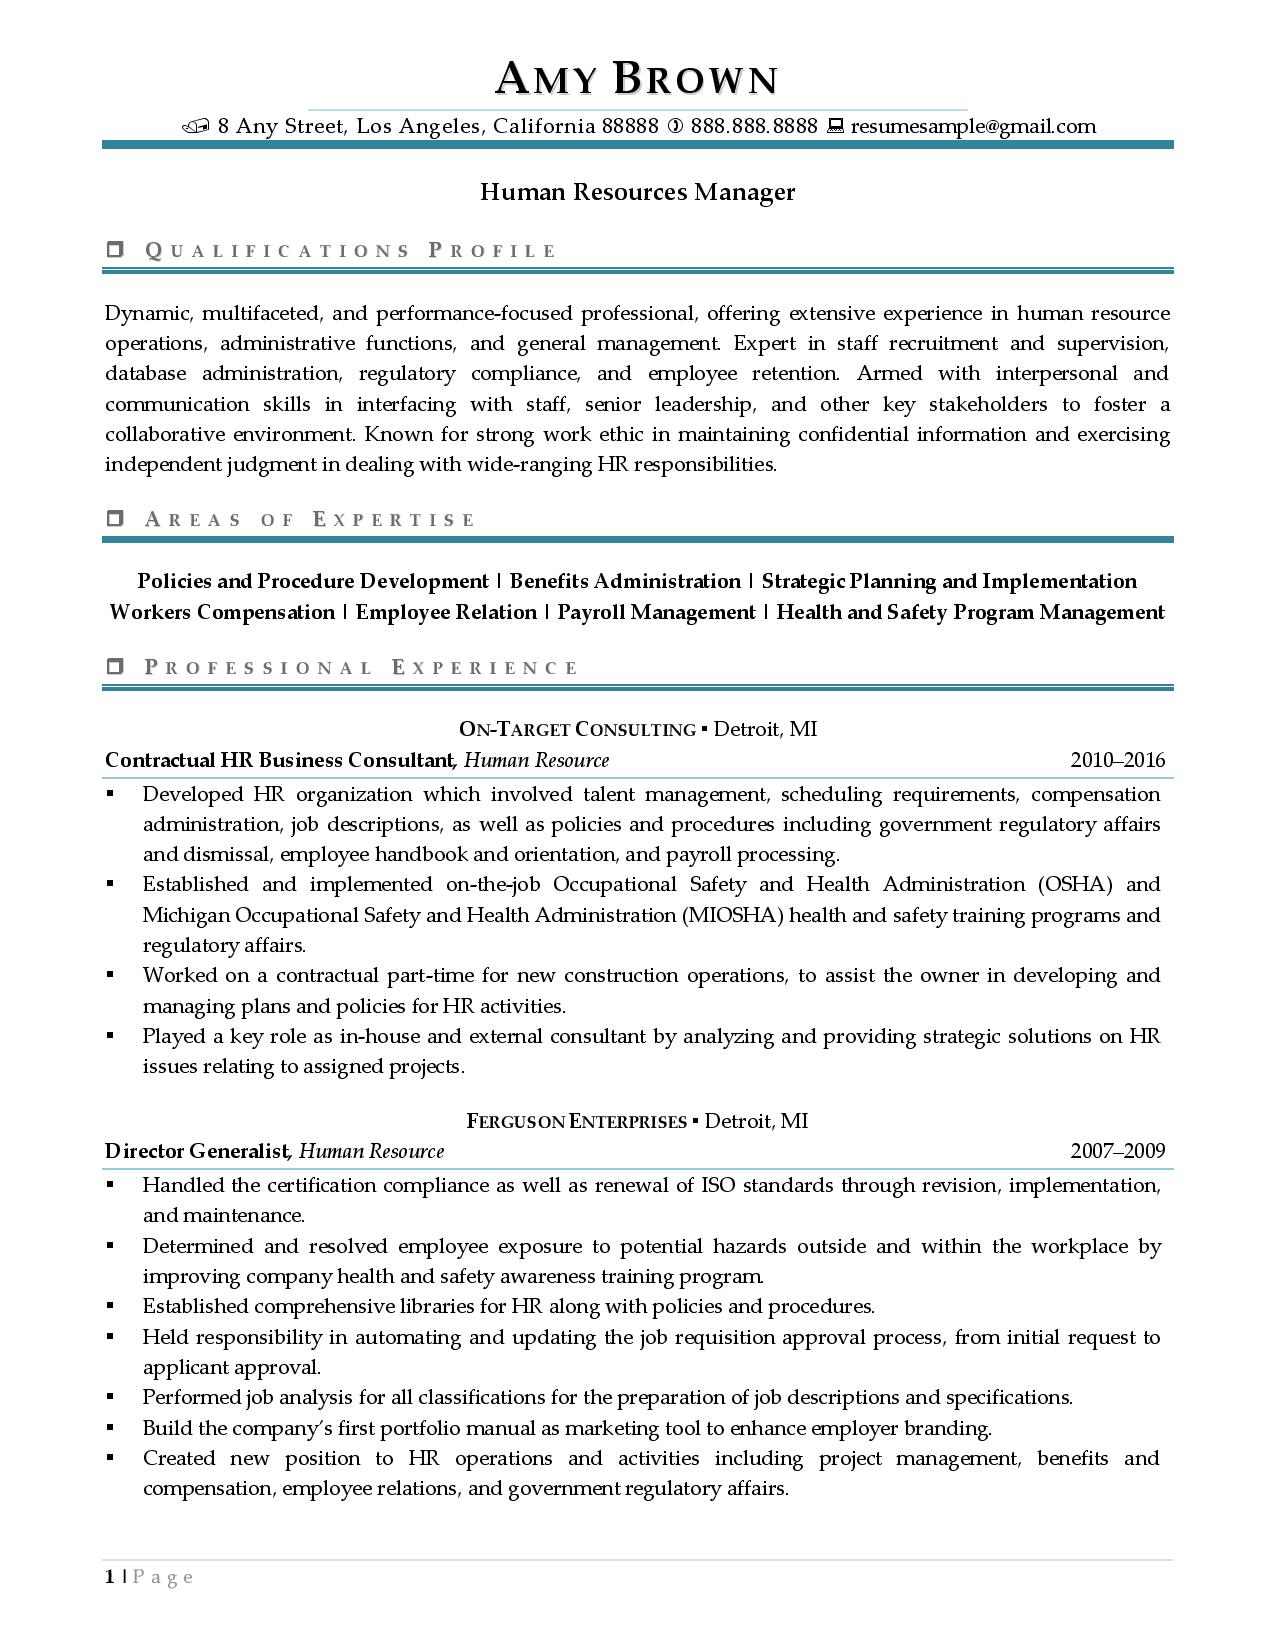 human resources resume objectives examples